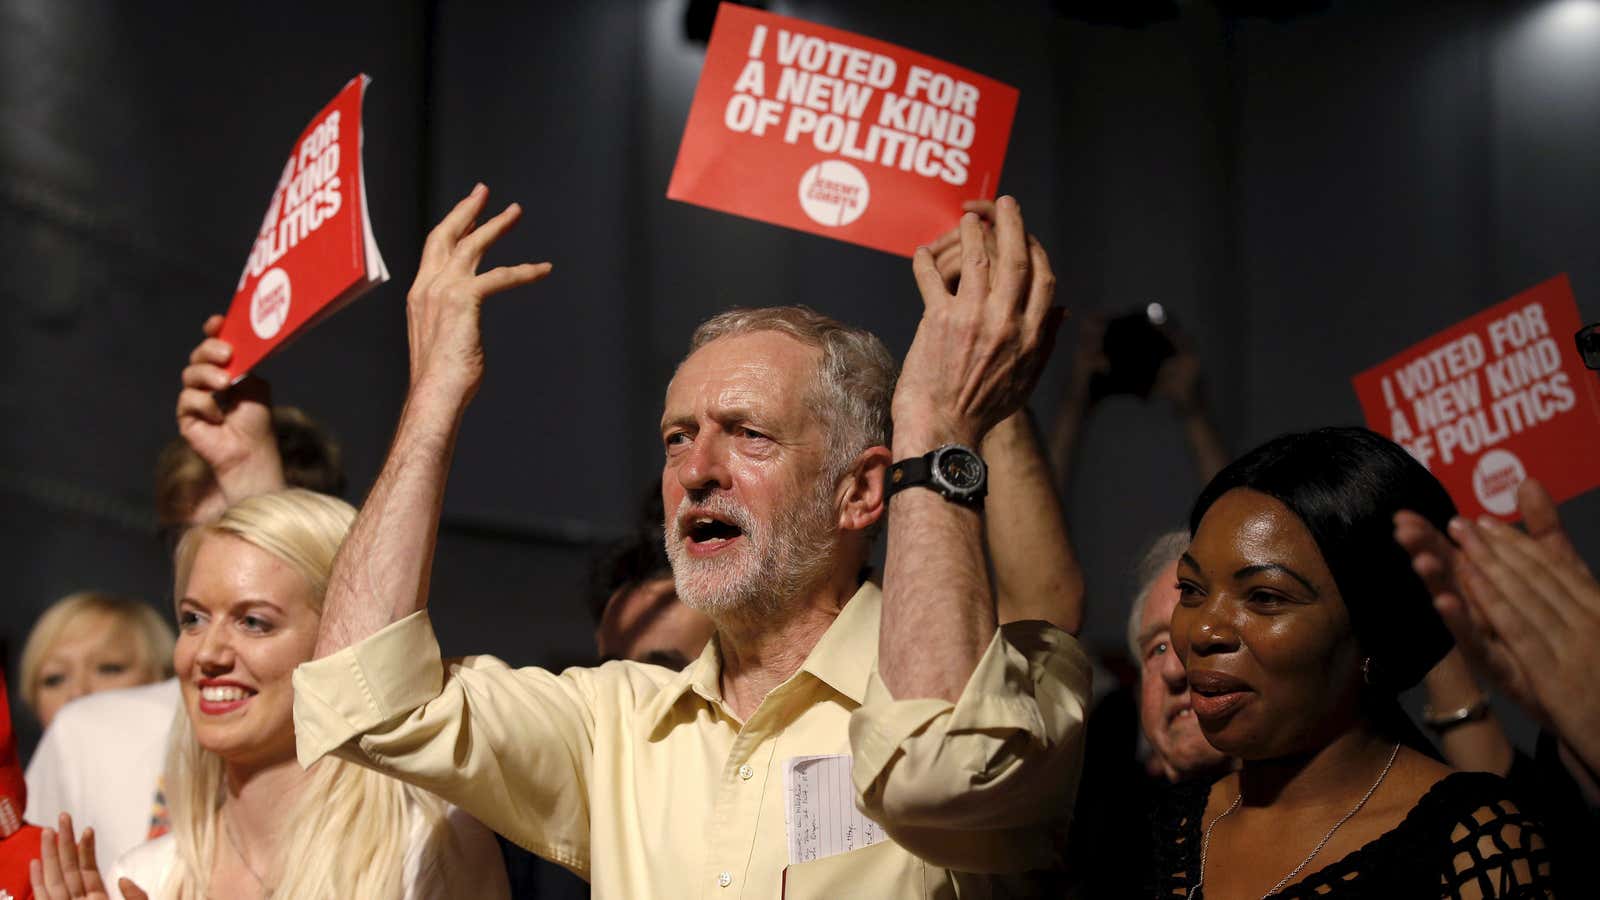 Jeremy Corbyn has beaten the odds to lead the UK’s opposition party